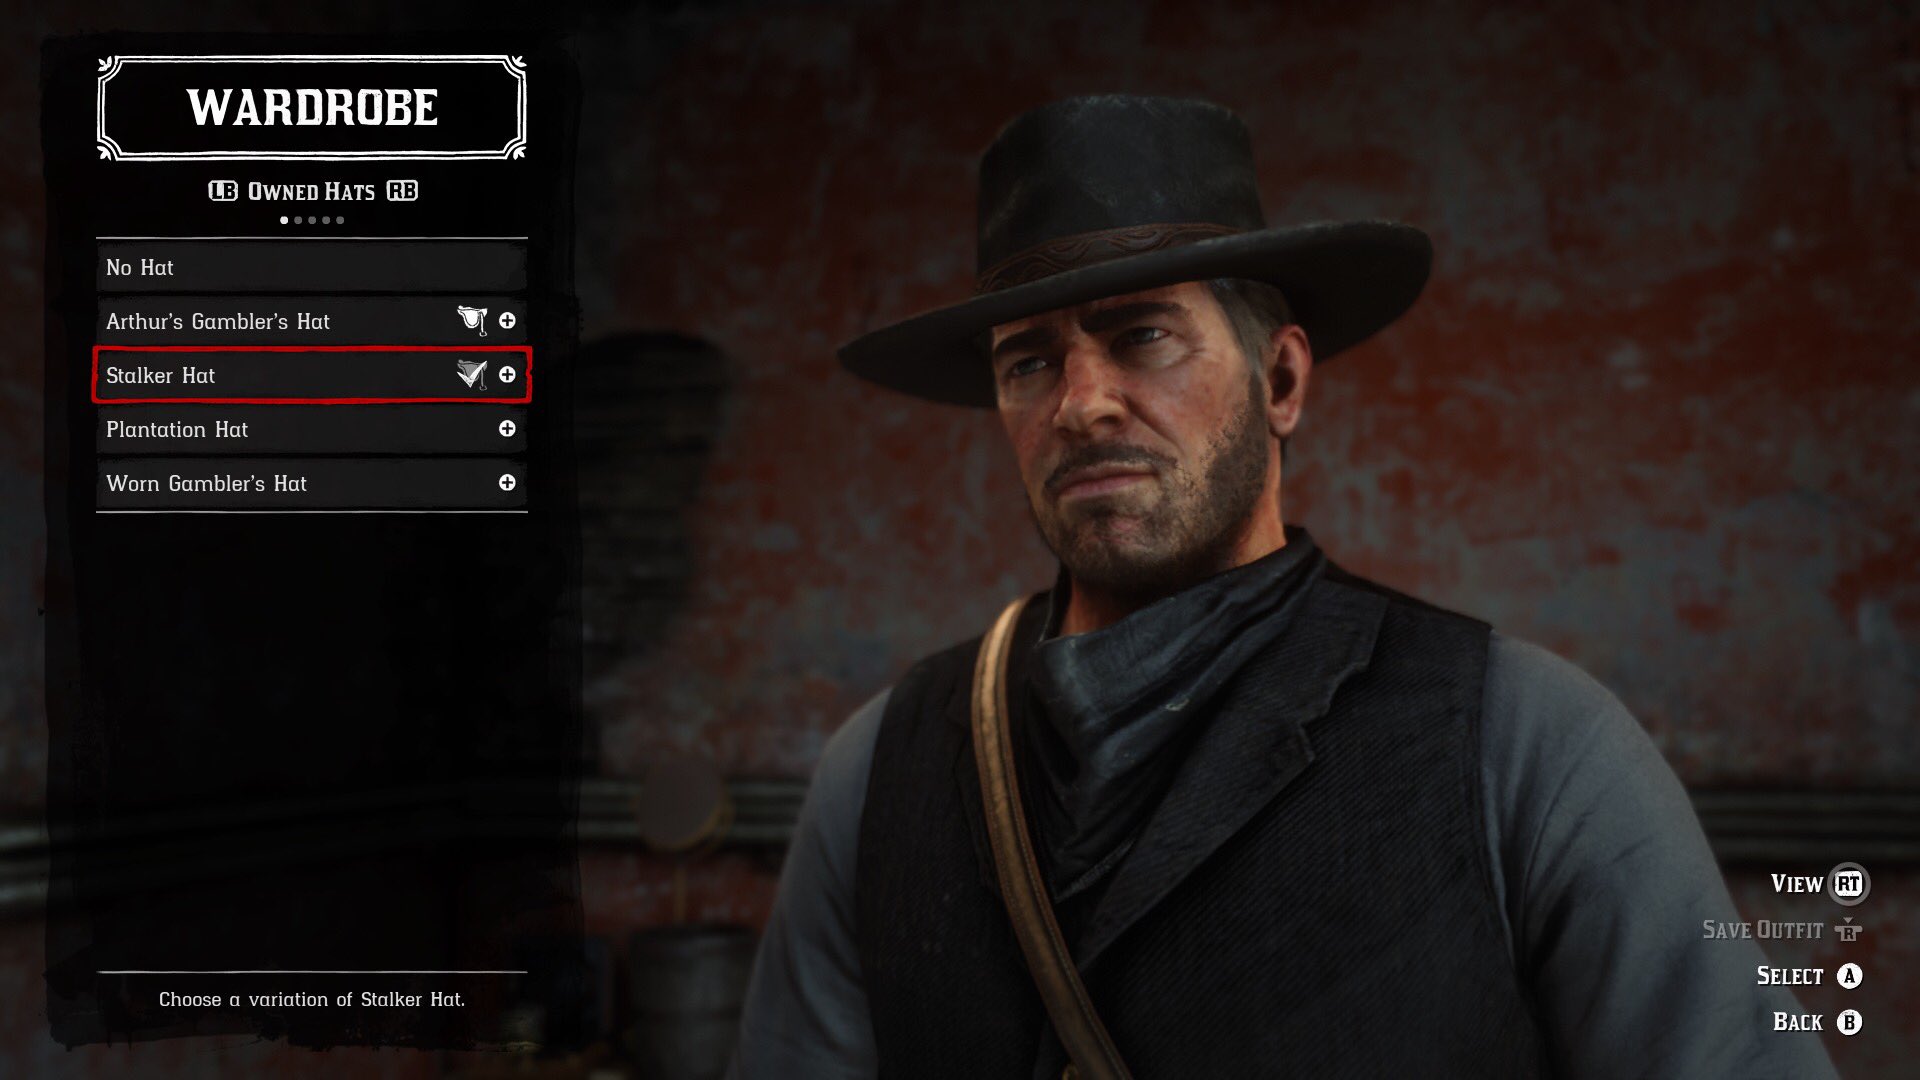 sexypanda69 on X: I made Joshua faraday from the magnificent seven movie  in red dead redemption 2! #RDR2 #RedDeadRedempion2 #joshuafaraday   / X